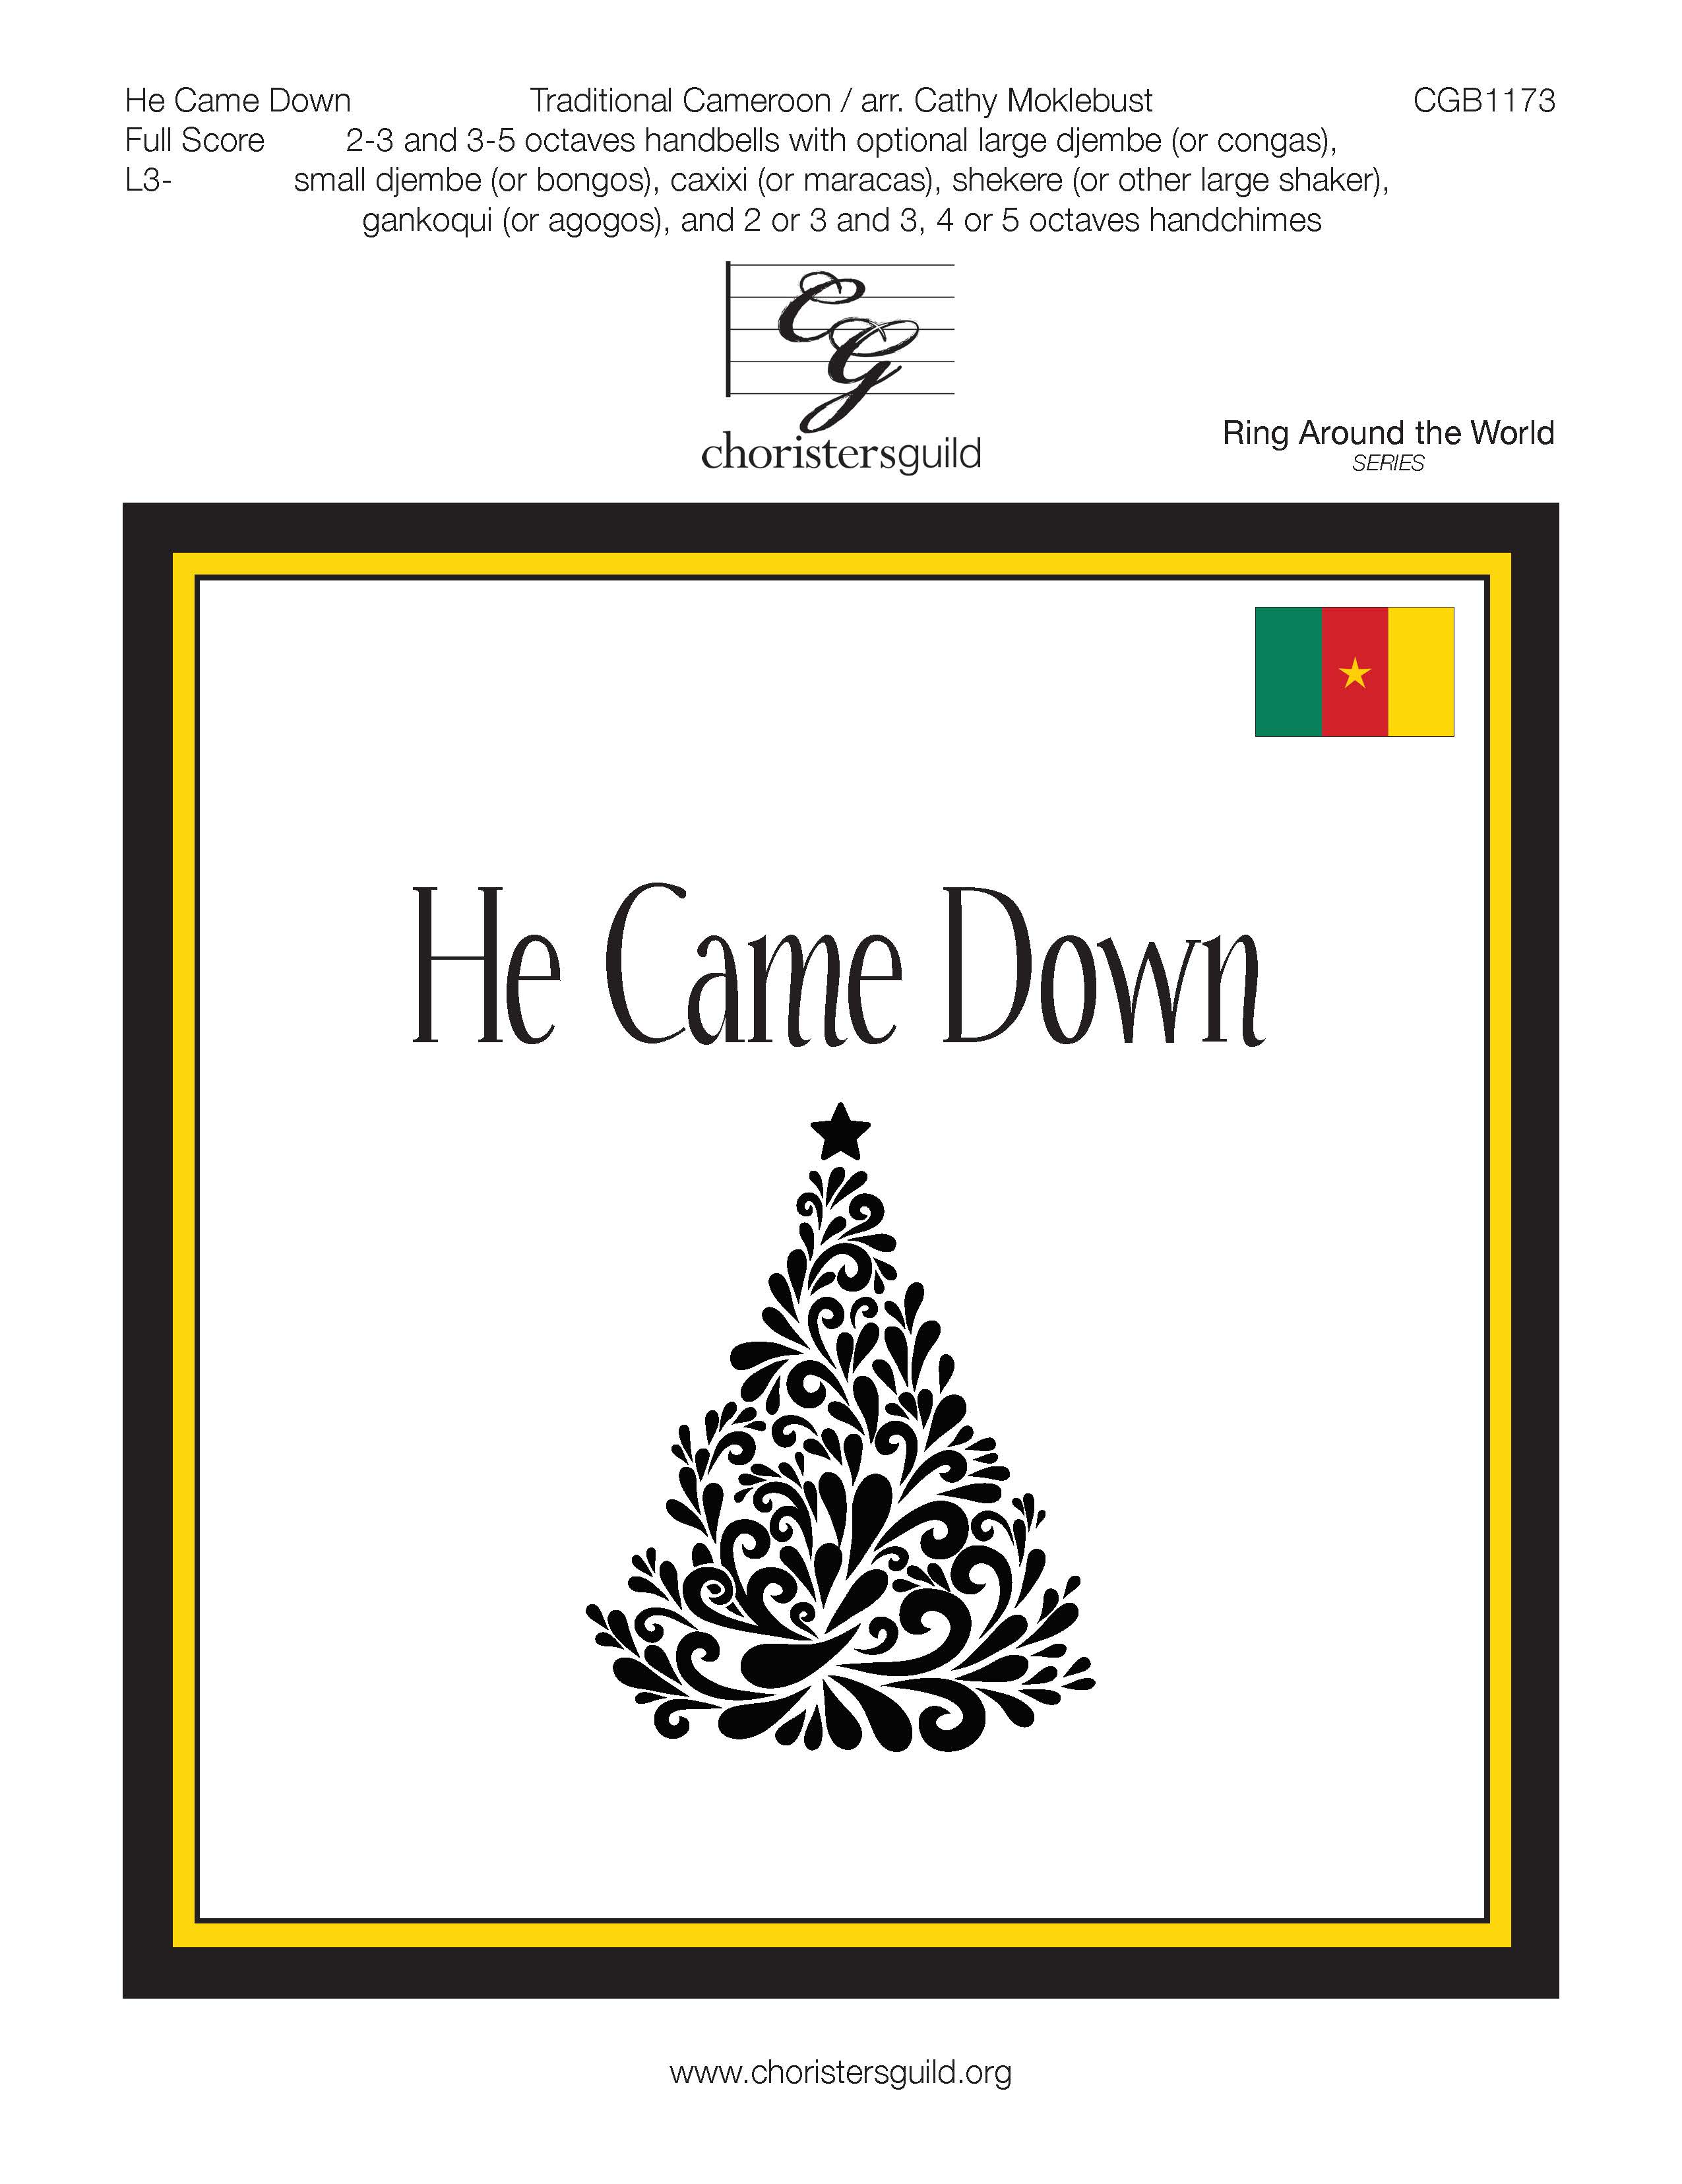 He Came Down - Full Score (2-5 octaves)